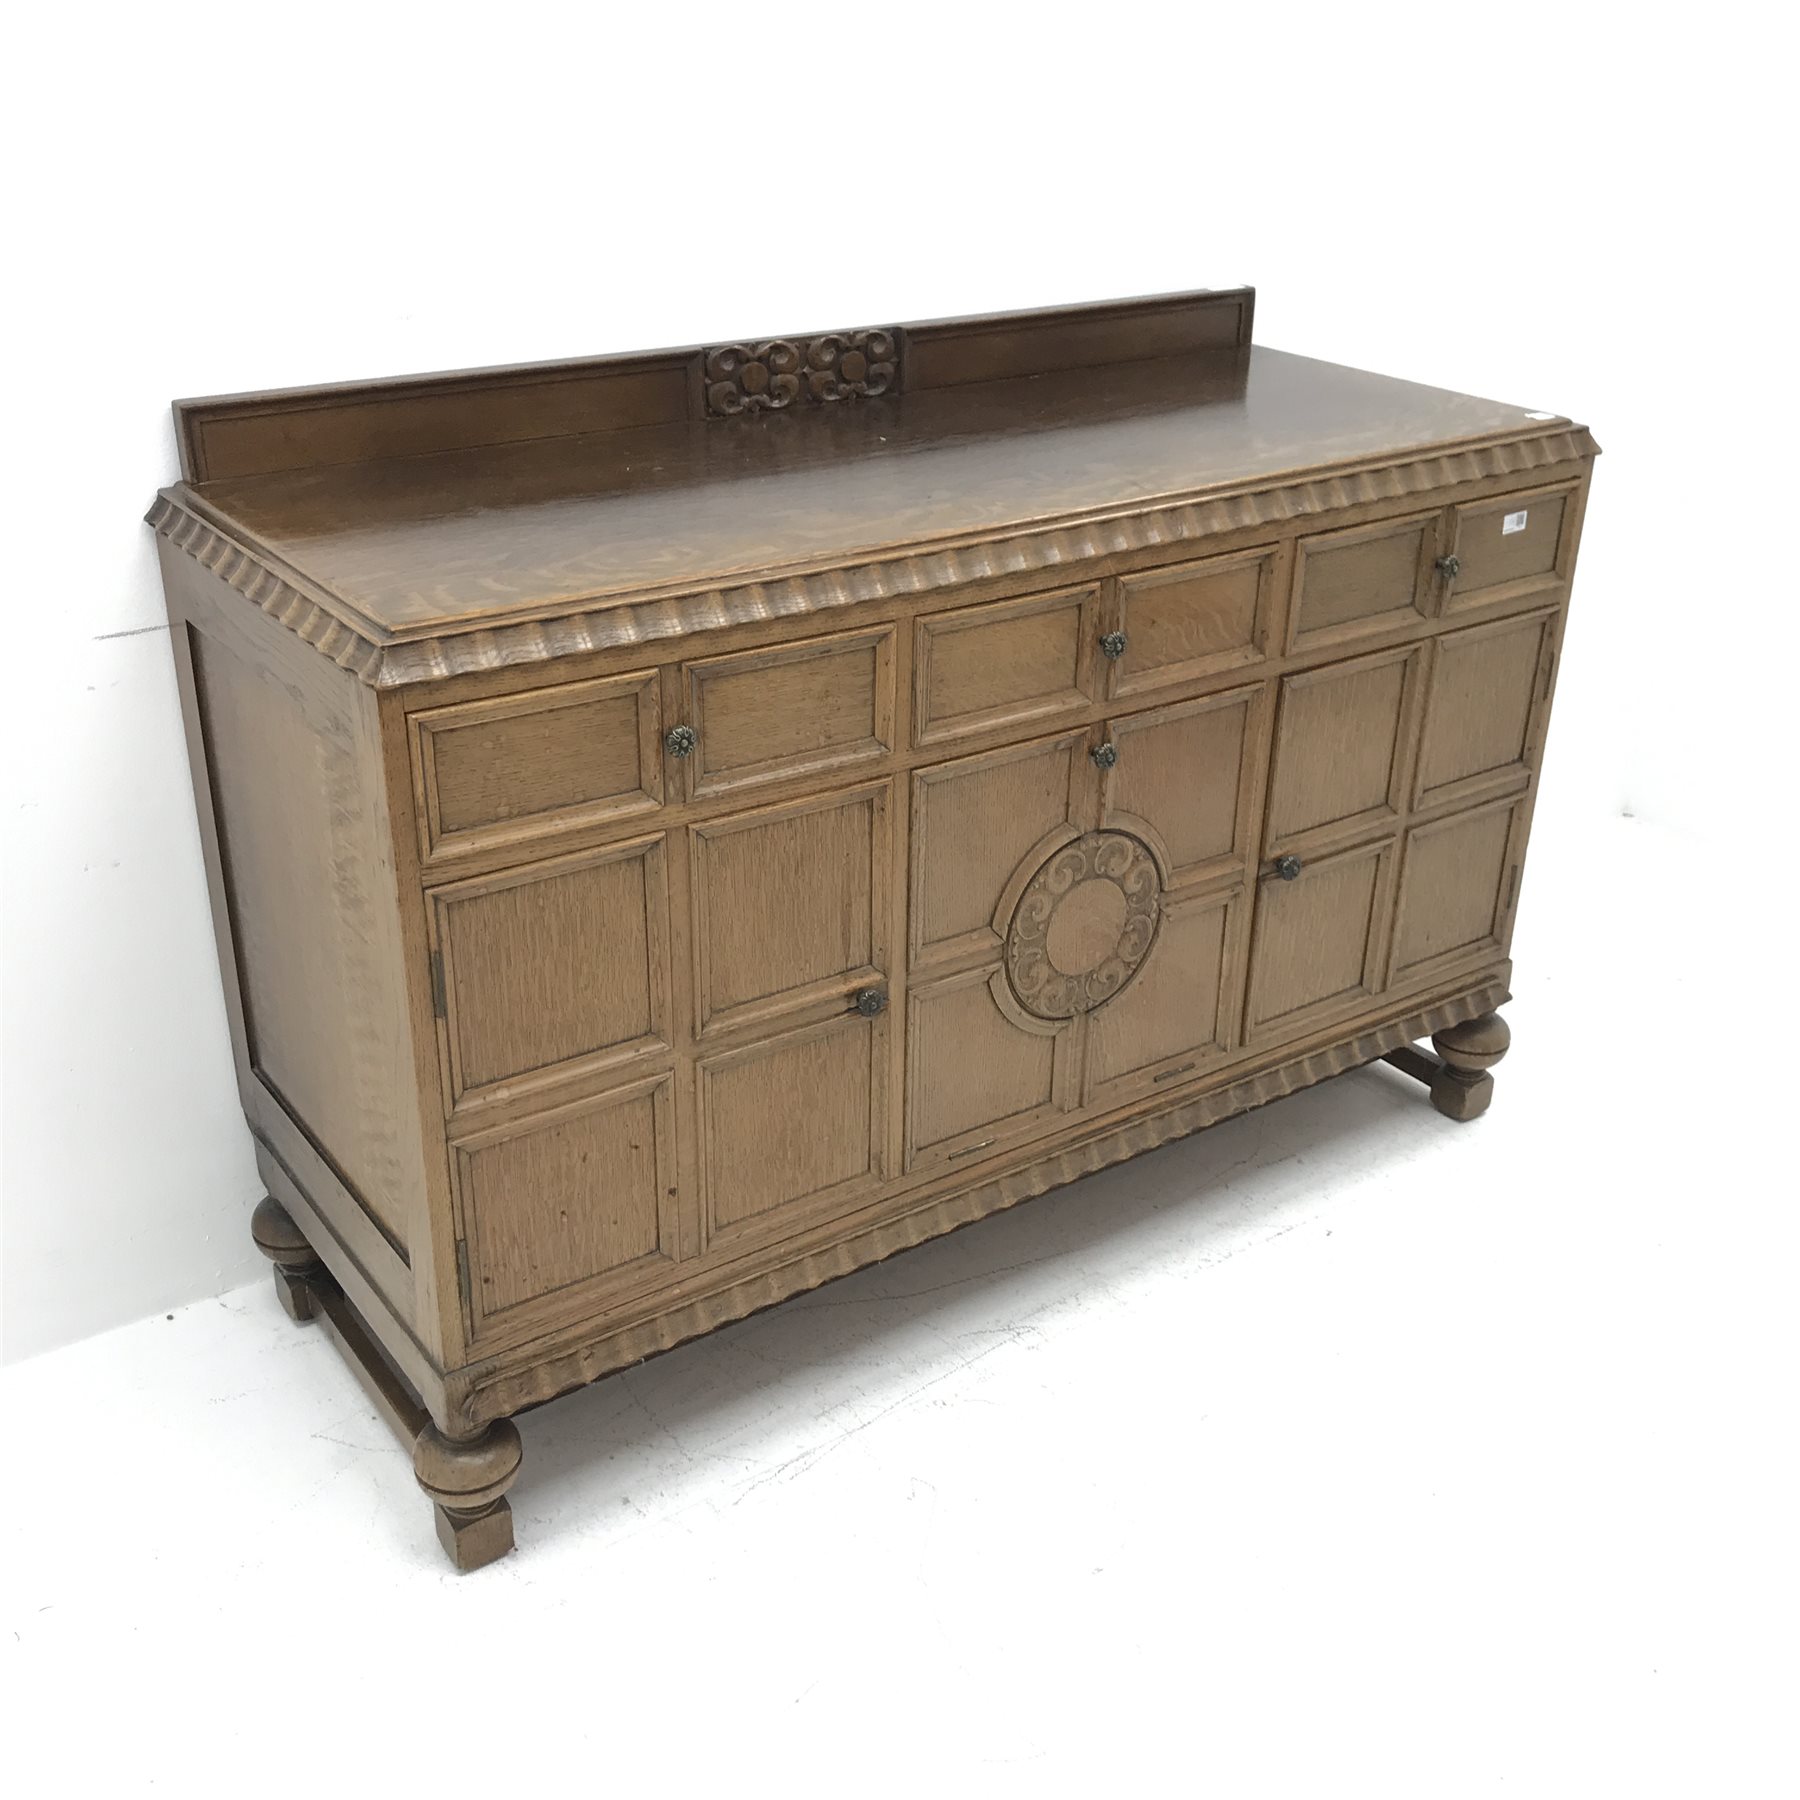 E. Gomme Ltd of High Wycombe oak sideboard, raised carved back, moulded top, three drawers above two - Image 3 of 5